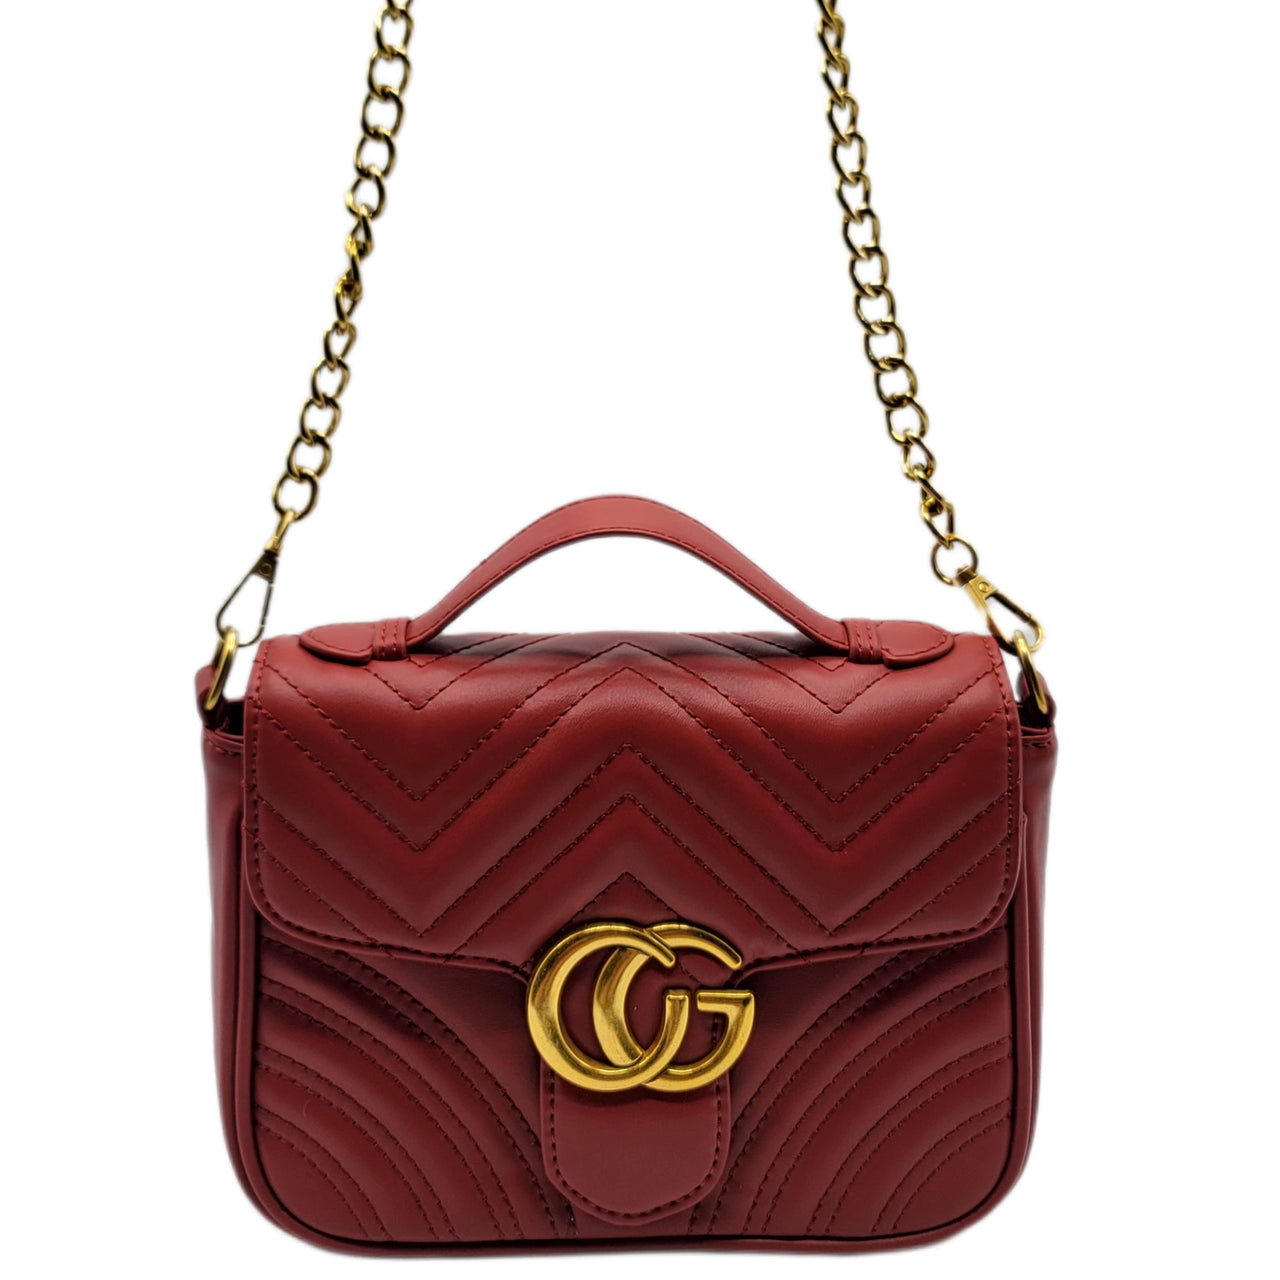 The Bag Couture Handbags, Wallets & Cases Gucci Marmont Crossbody Bag Maroon